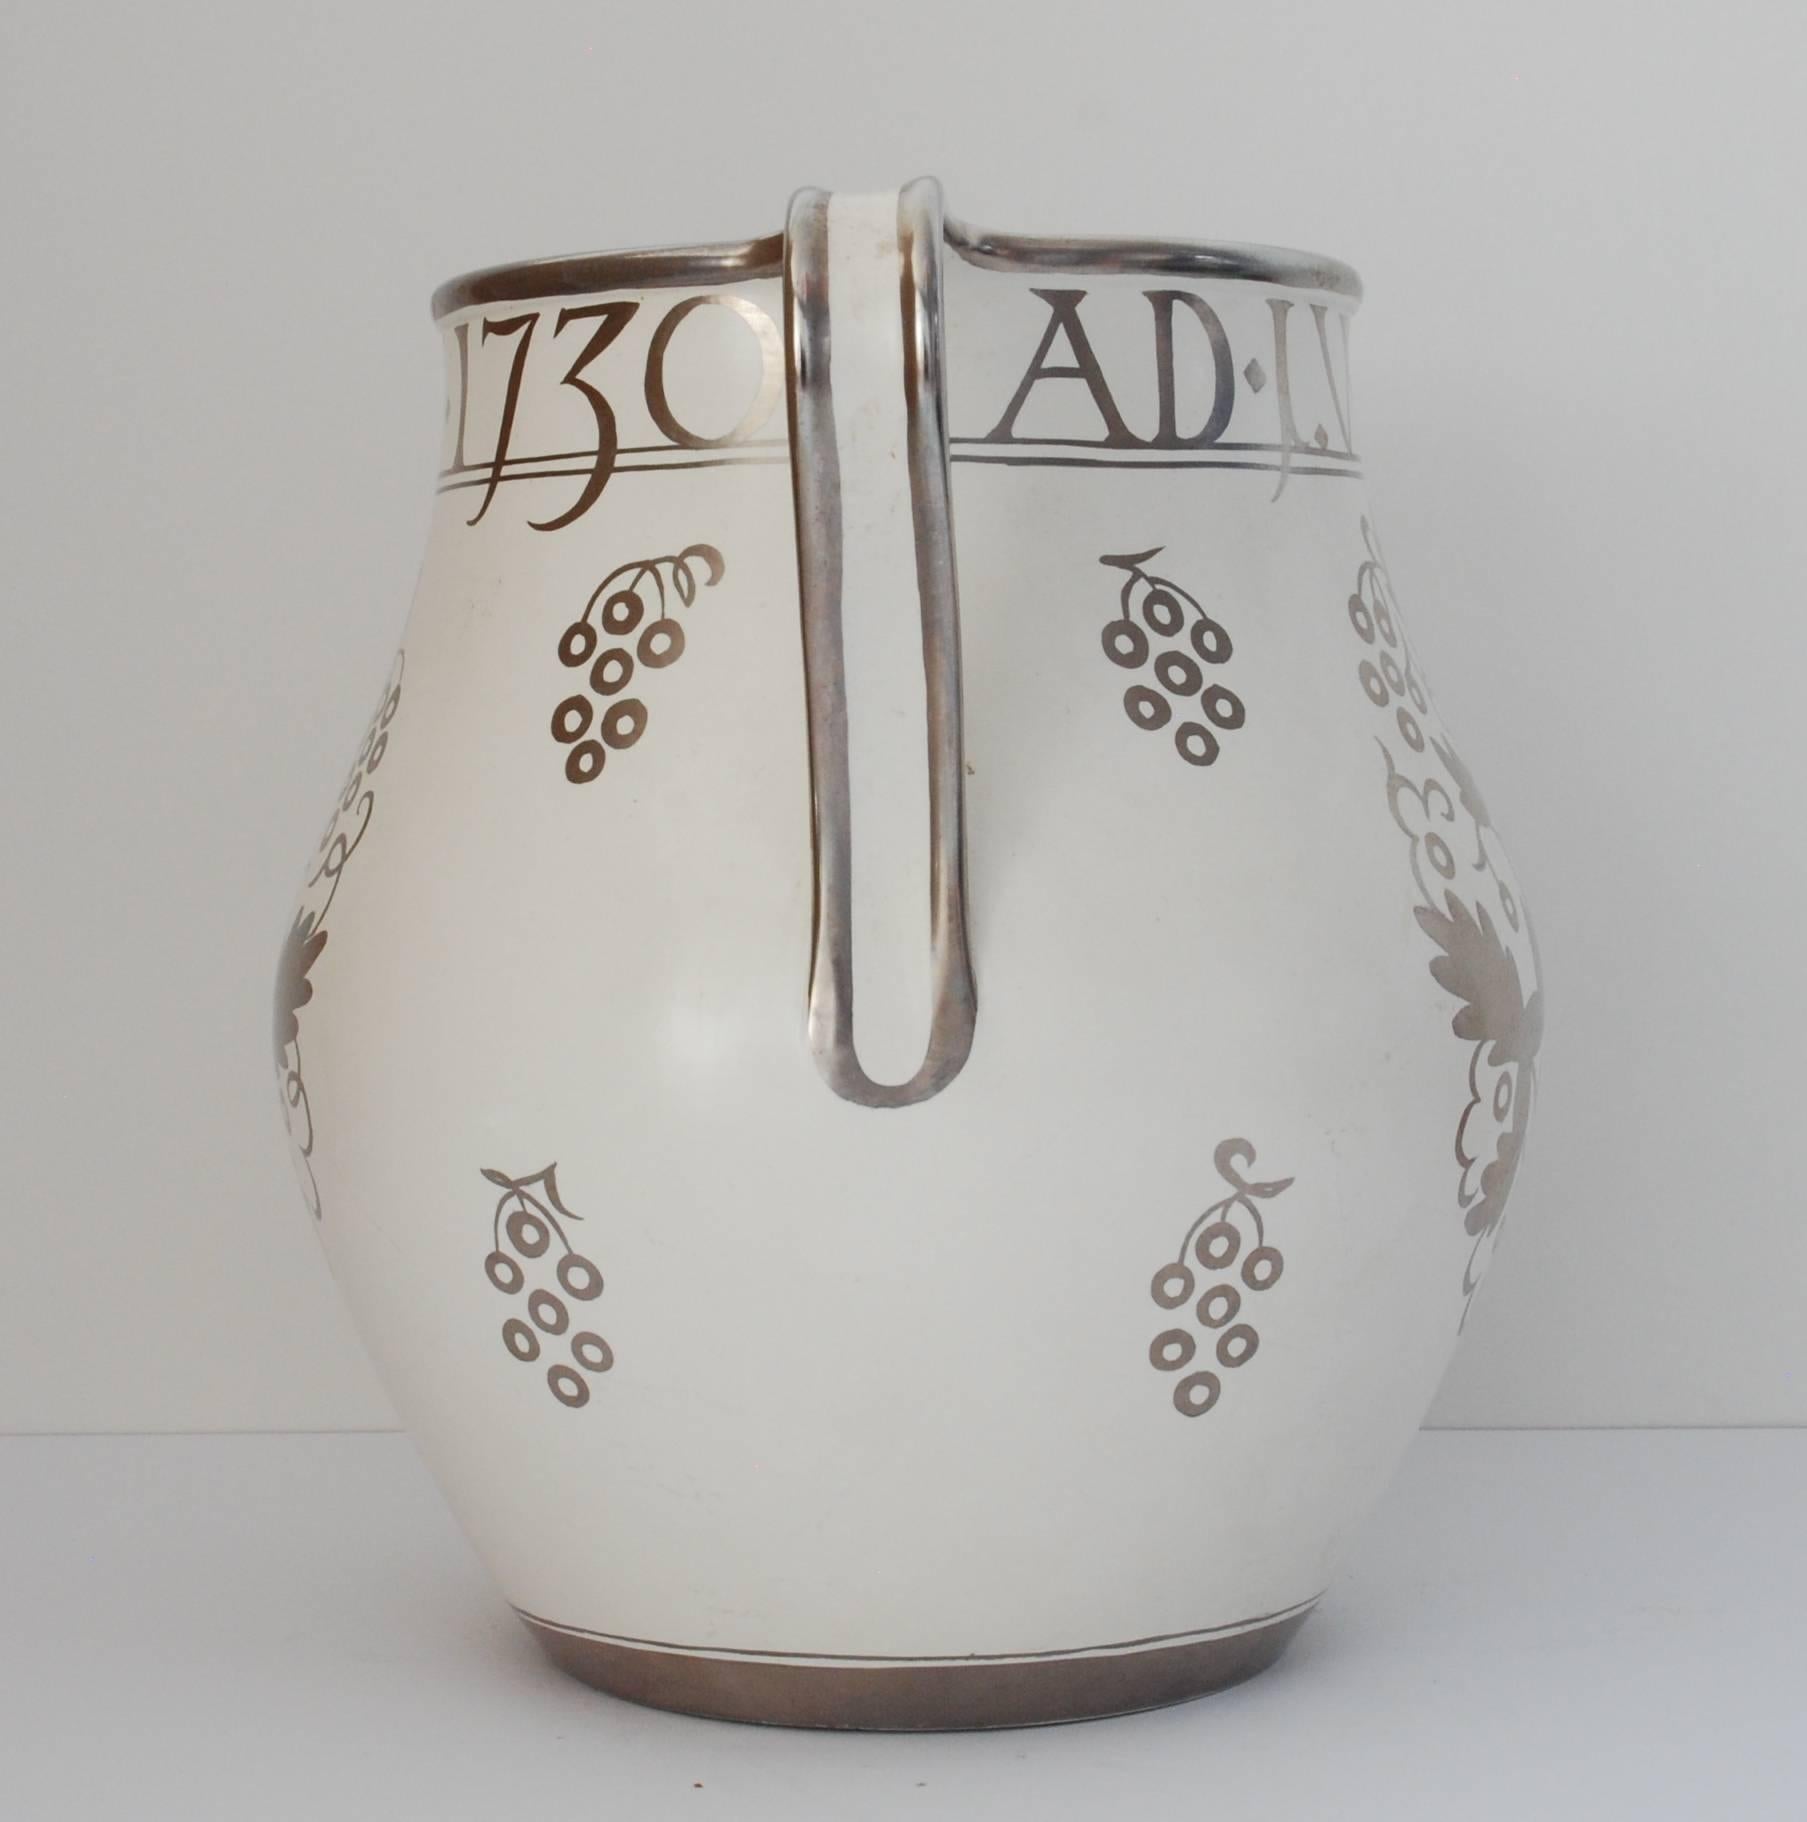 Two handled vase in creamware, with moonstone glaze and platinum lustre decoration. Designed by Louise Powell for the bicentenary of Wedgwood’s birth. 

The dating of this example is something of a mystery. 50 of these were made in 1930 for the